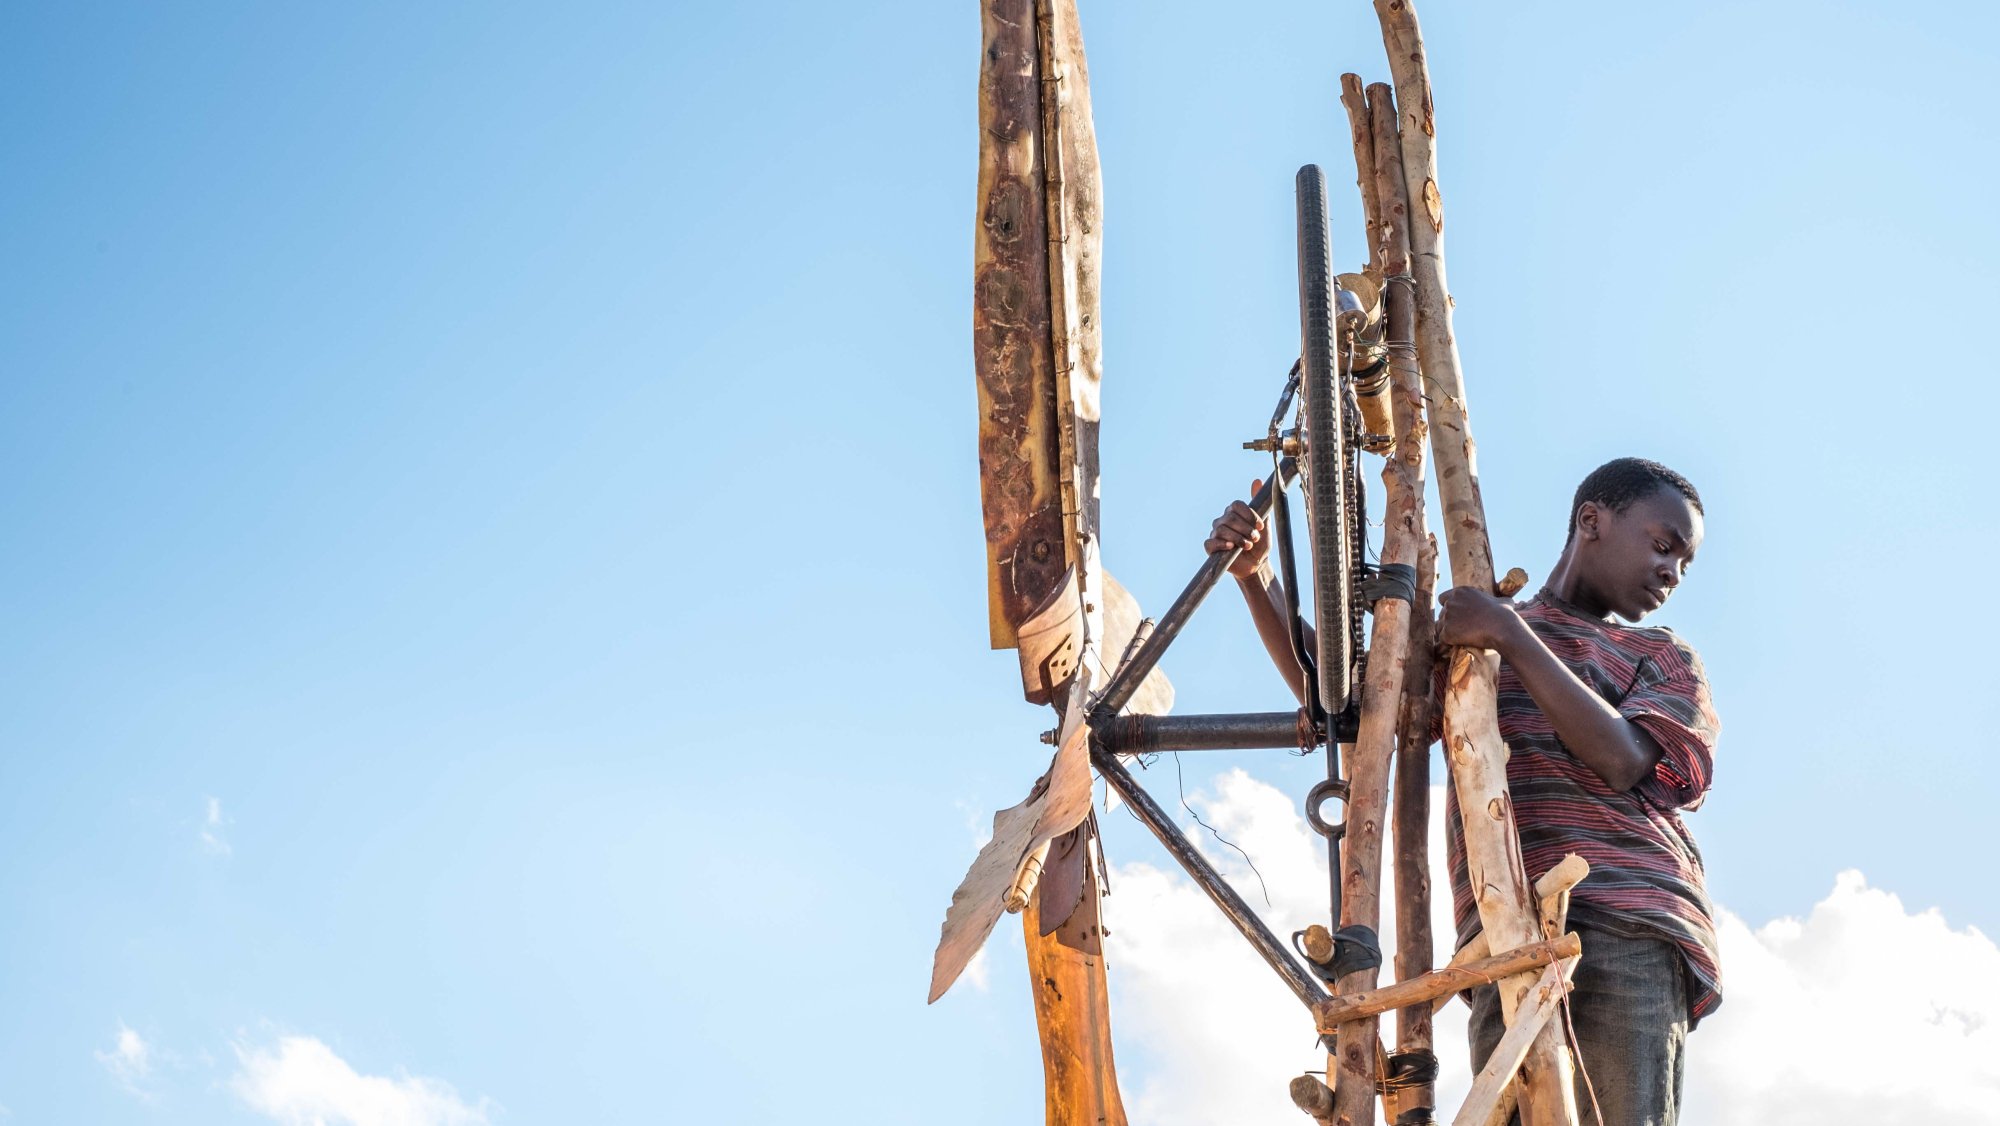 A Black boy looks down from his invention in "The Boy Who Harnessed the Wind"